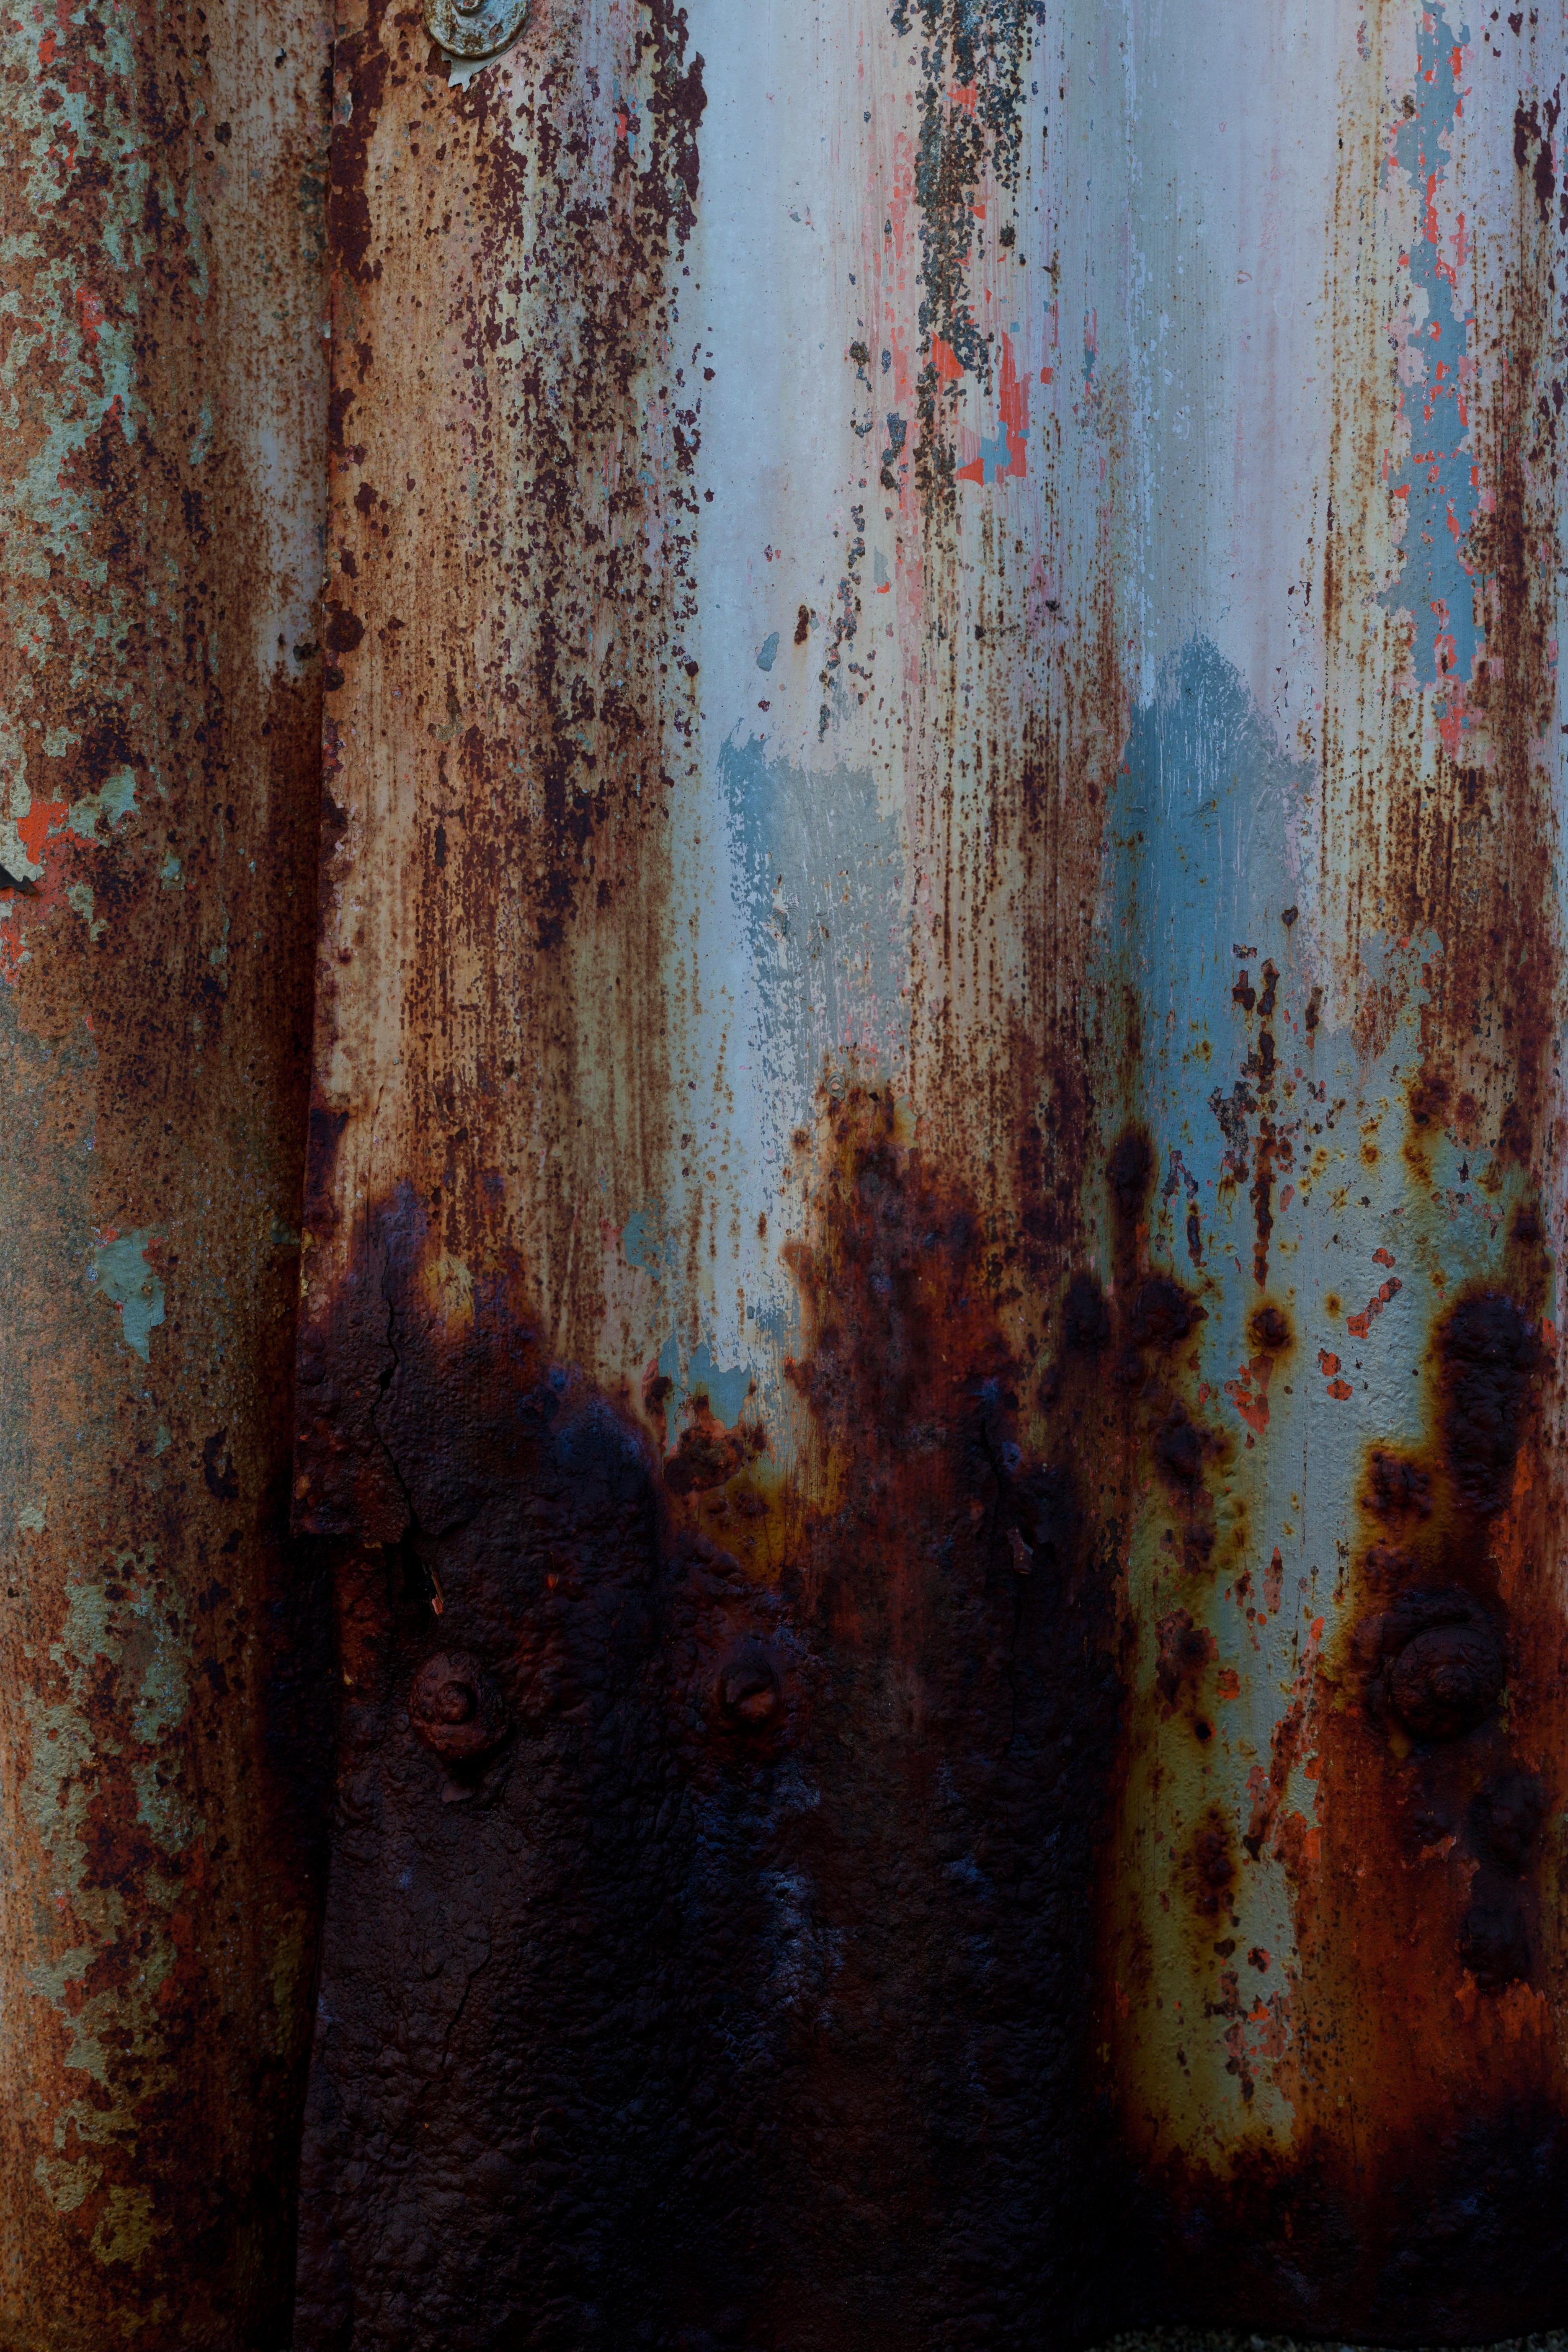 Rusted corrugated metal texture photo